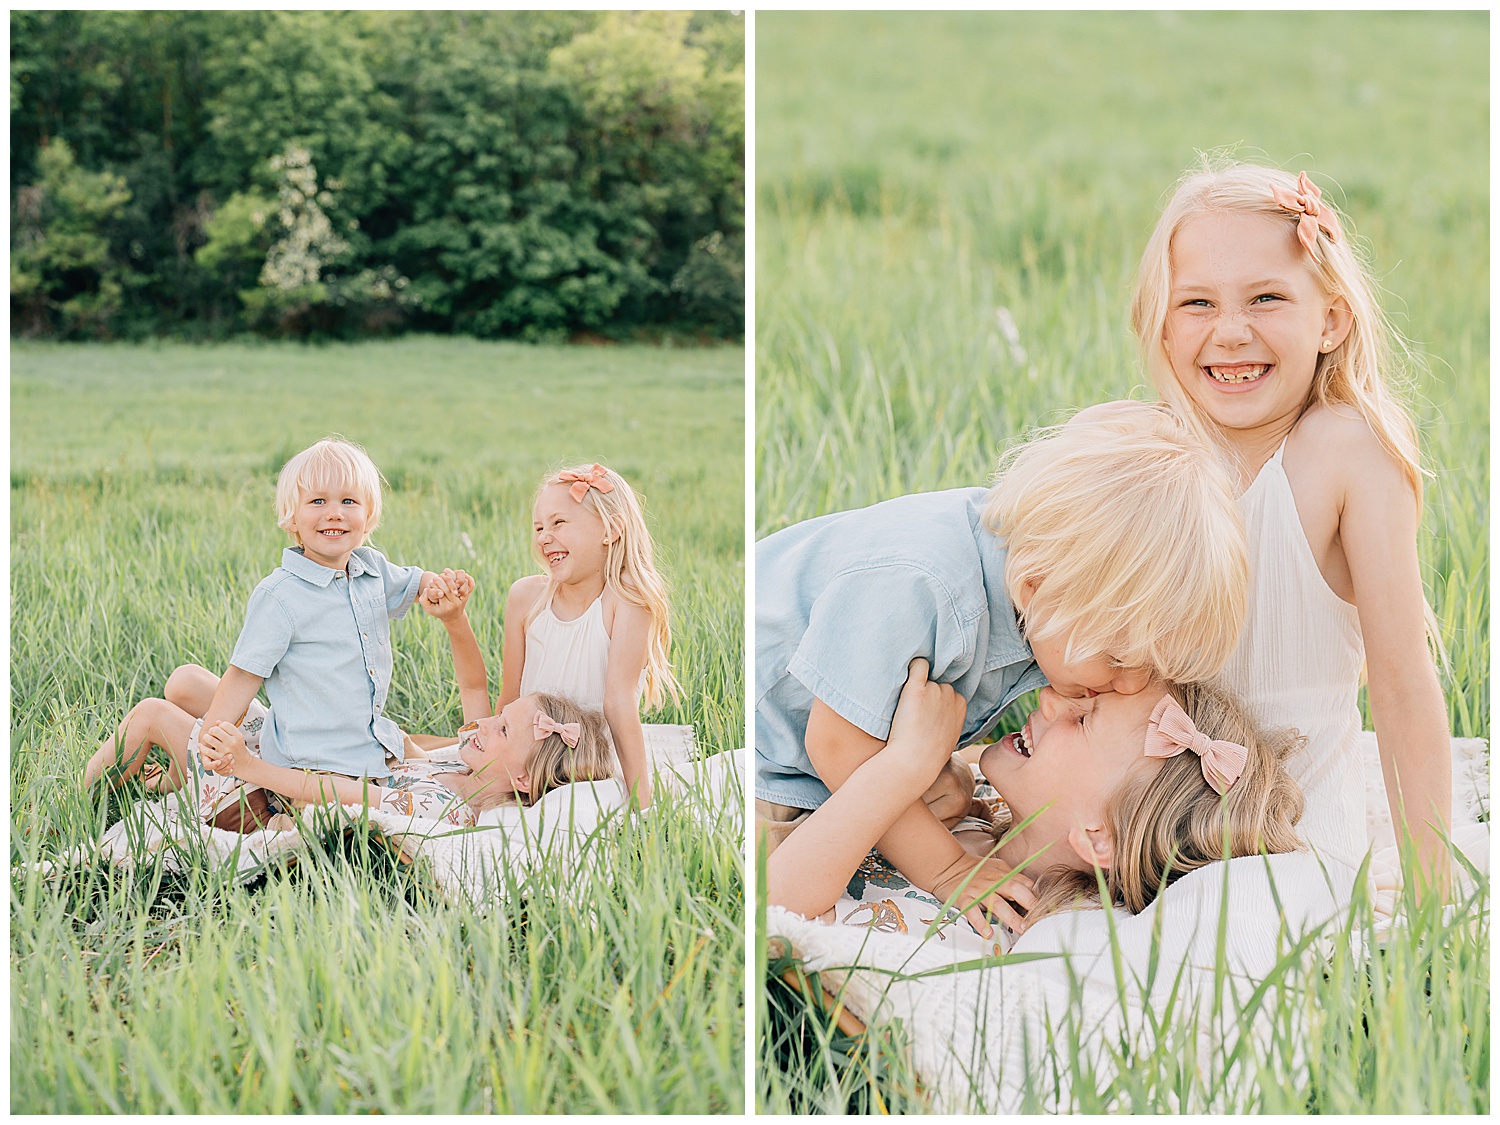 Sibling family picture pose ideas. 